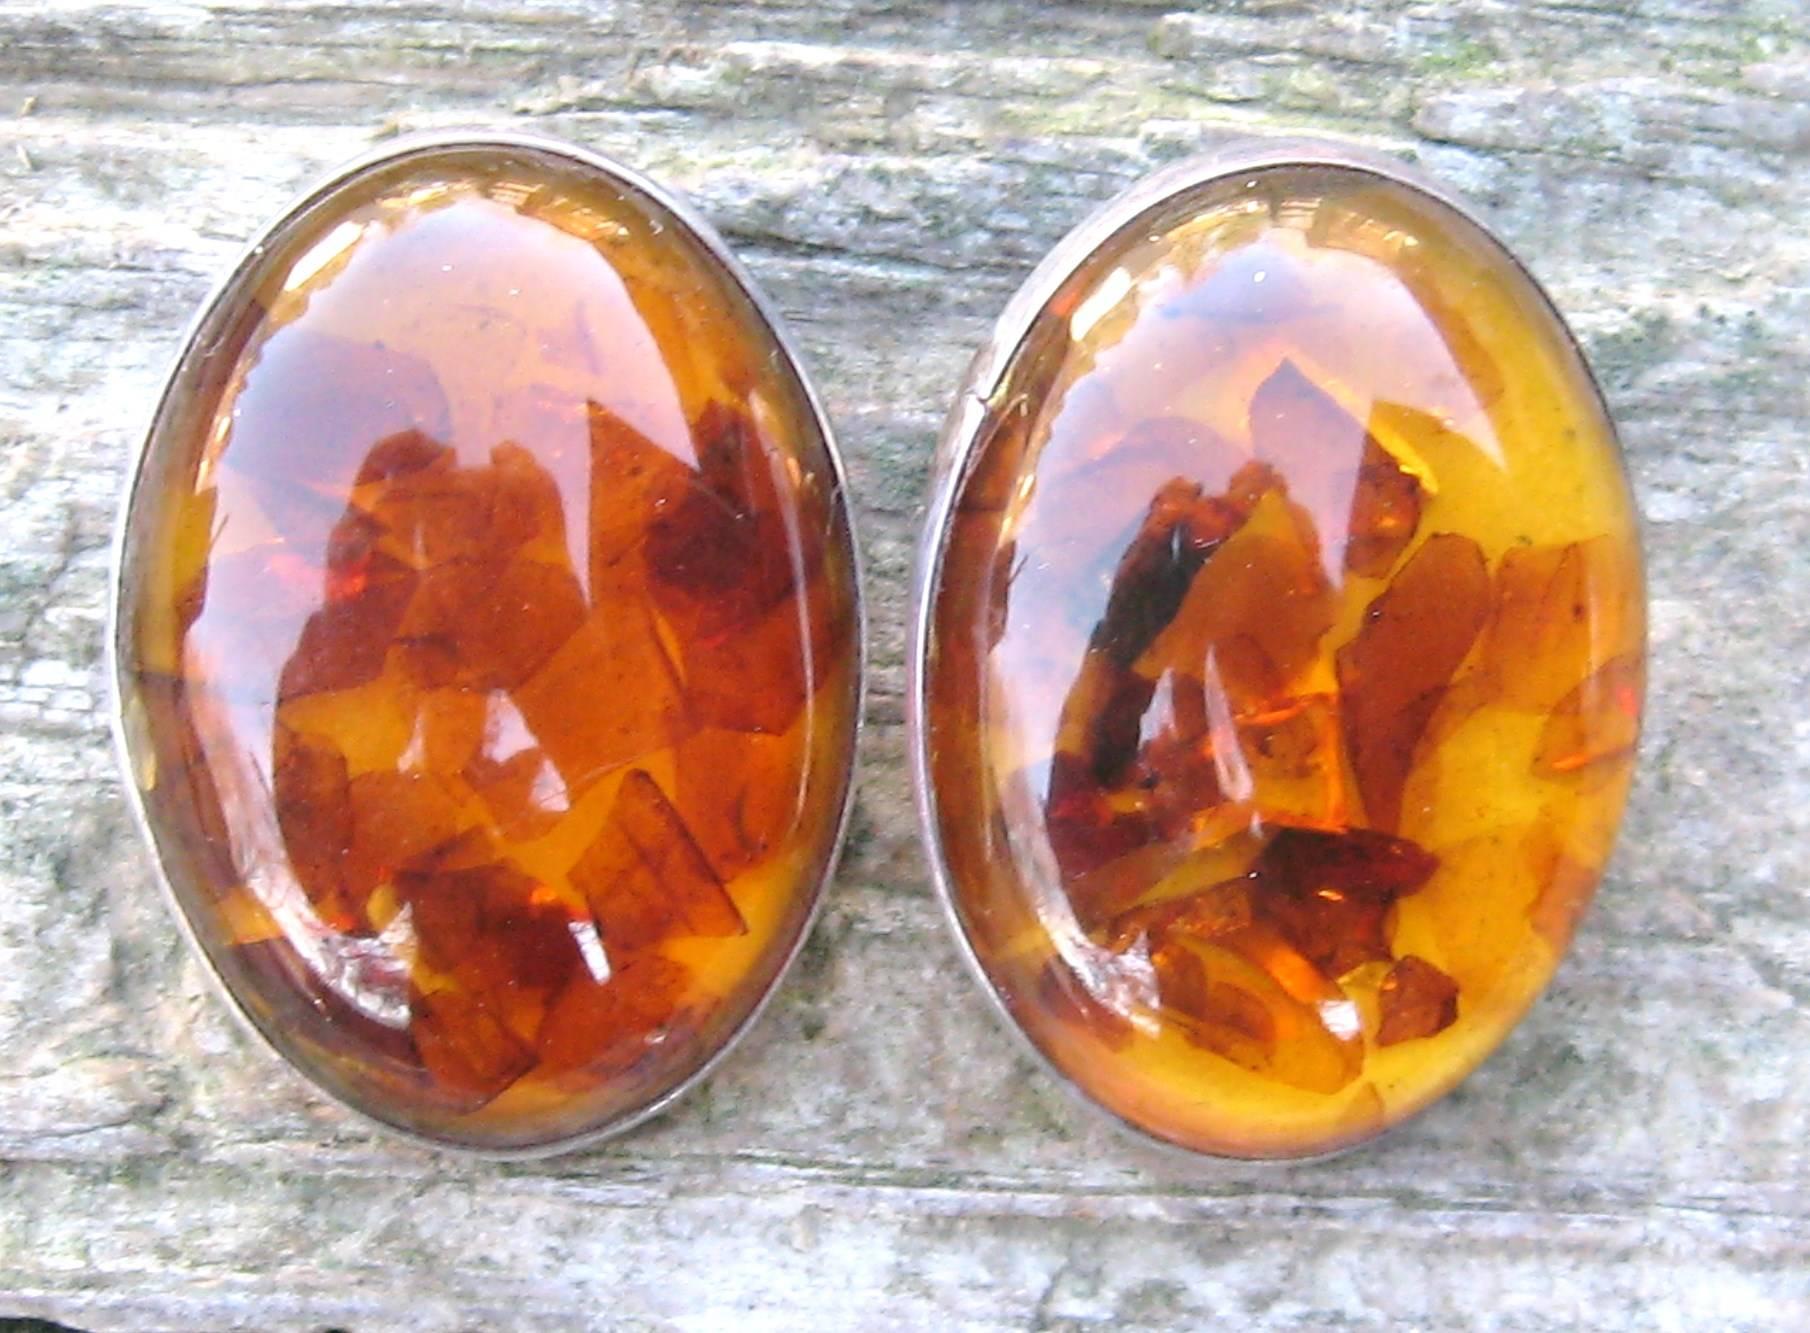 Large Handmade Baltic Amber Earrings. Clip On's. Measuring 1.60 inches x 1.19 inches.  Hallmarked on the back.  This is out of a massive collection of Hopi, Zuni, Navajo, Southwestern, sterling silver, (costume jewelry that was not worn)  and fine